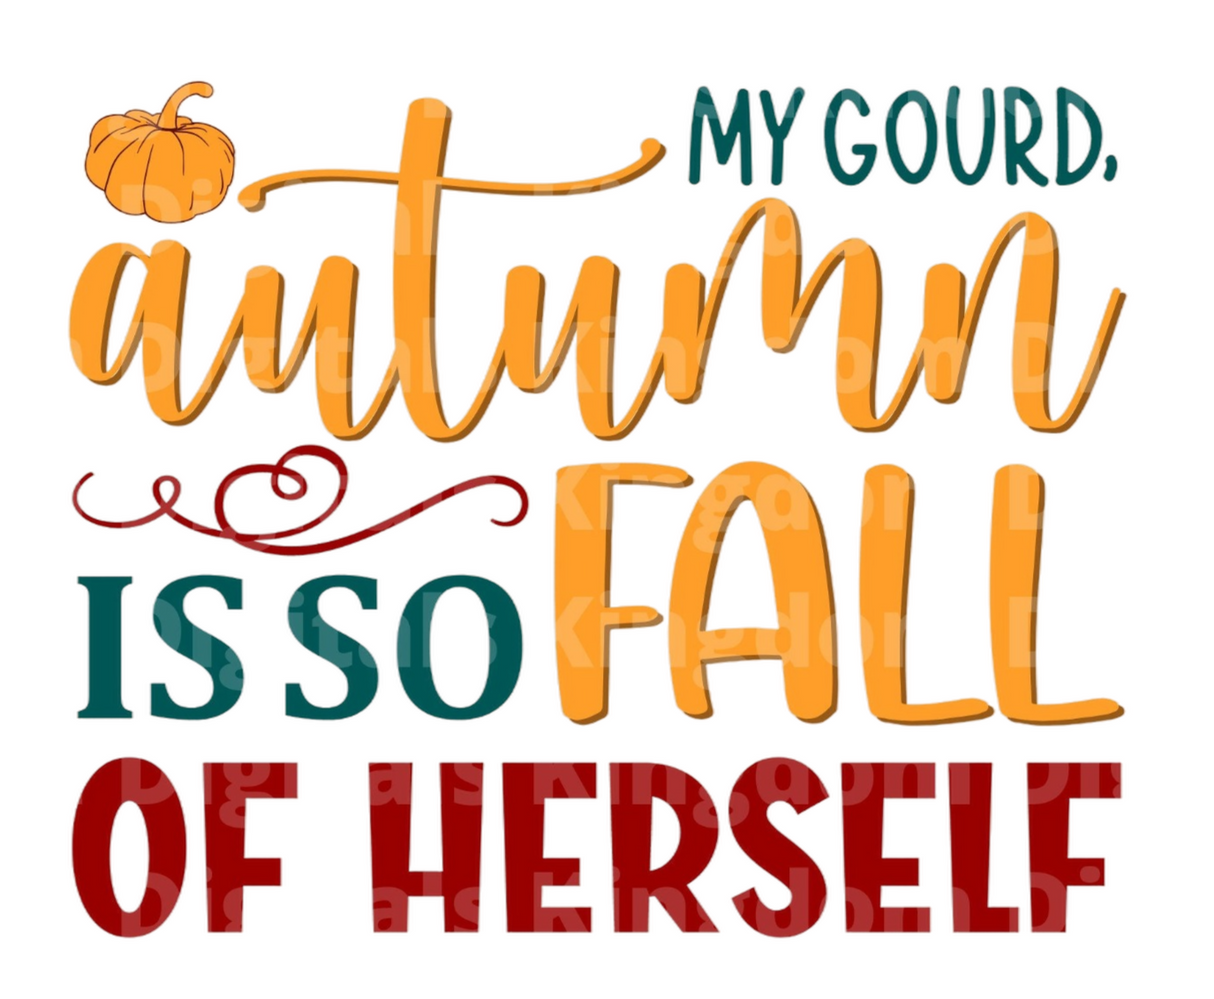 My Gourd Autumn is so fall of herself SVG Cut File